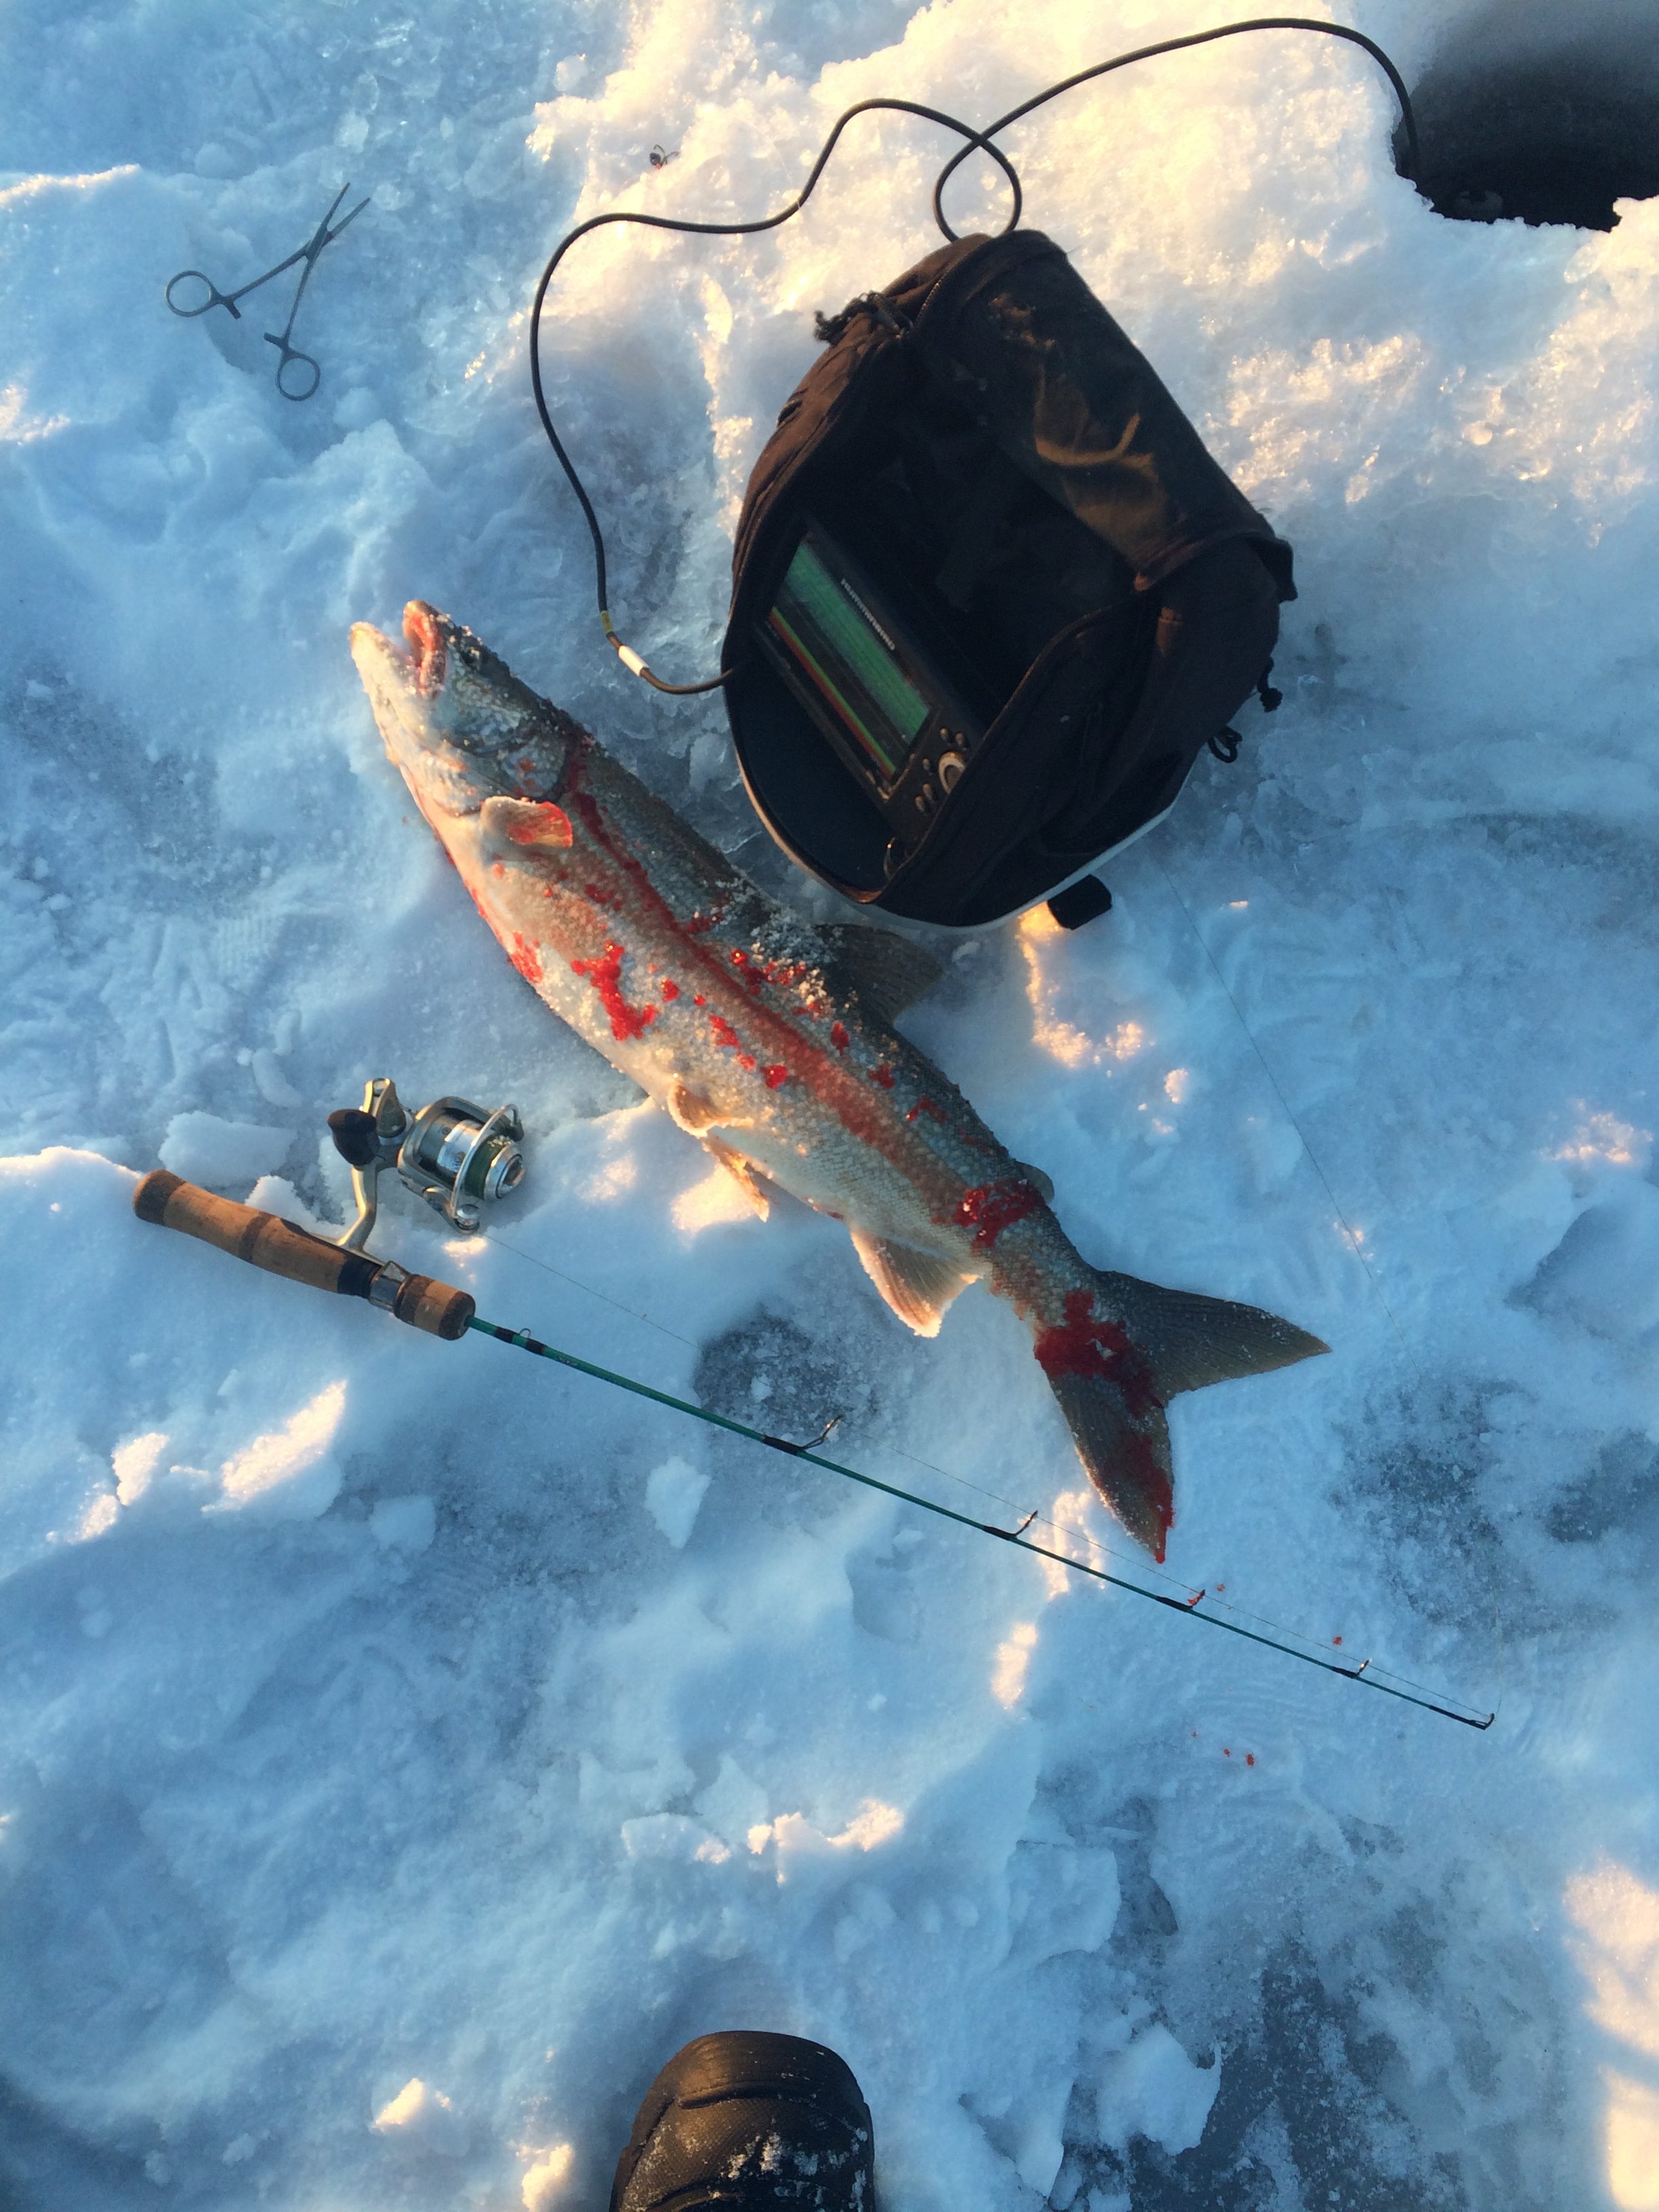 Anyone use the Fenwick Elite Tech MH ice rods for lake trout